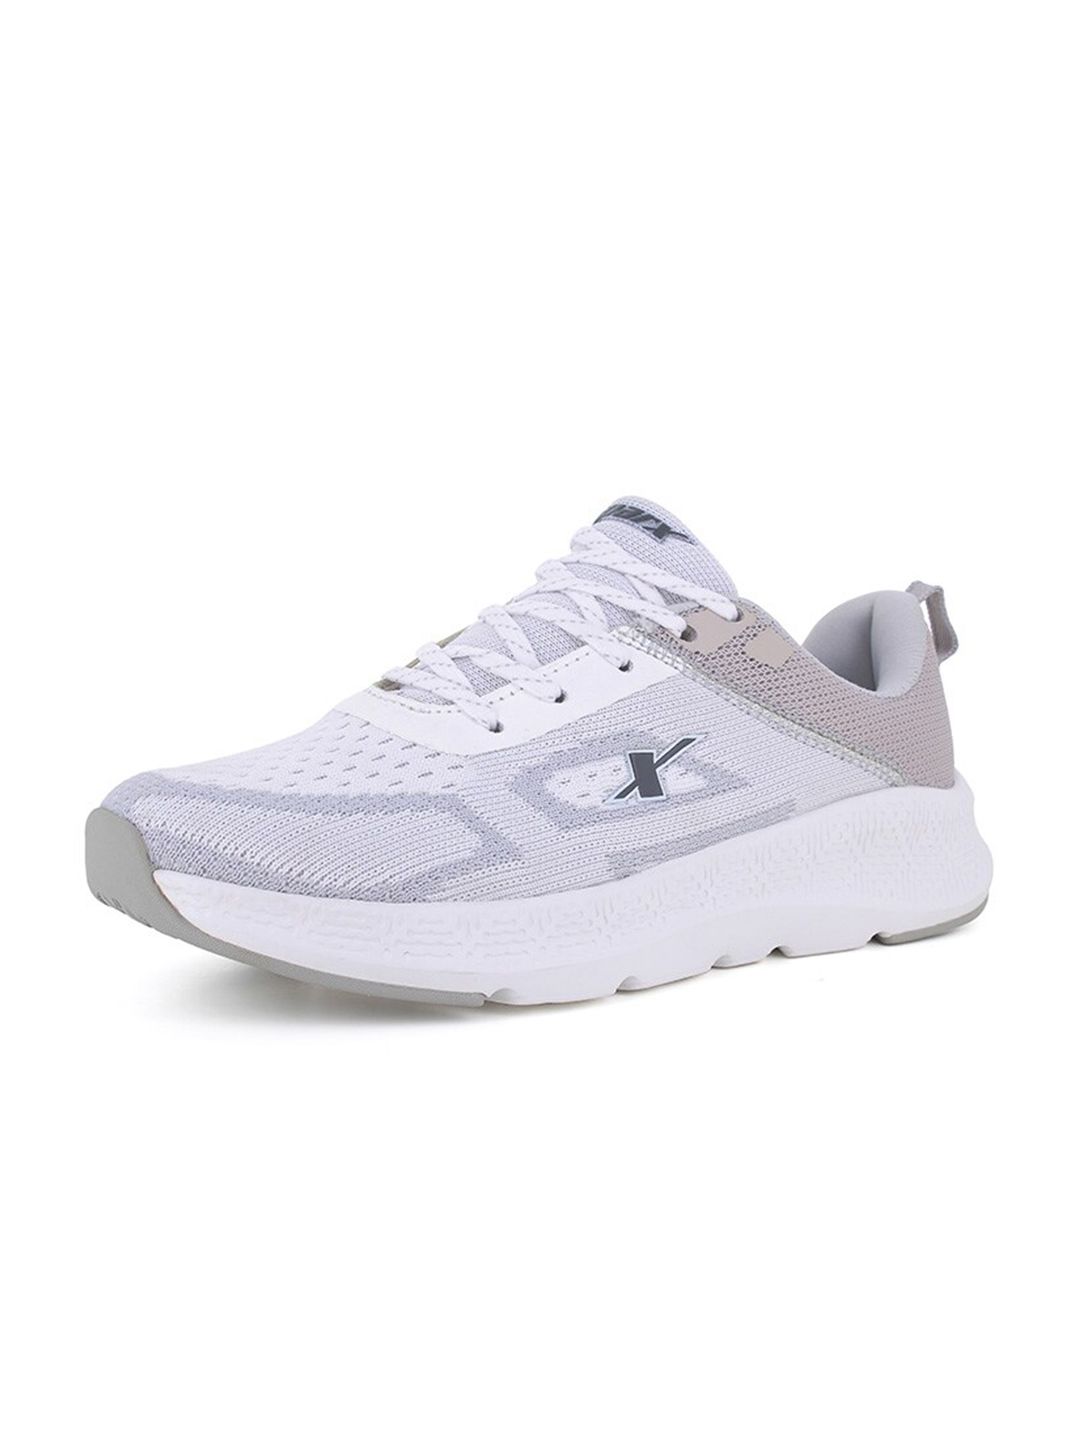 Sparx Women White Textile Running Non-Marking Shoes Price in India